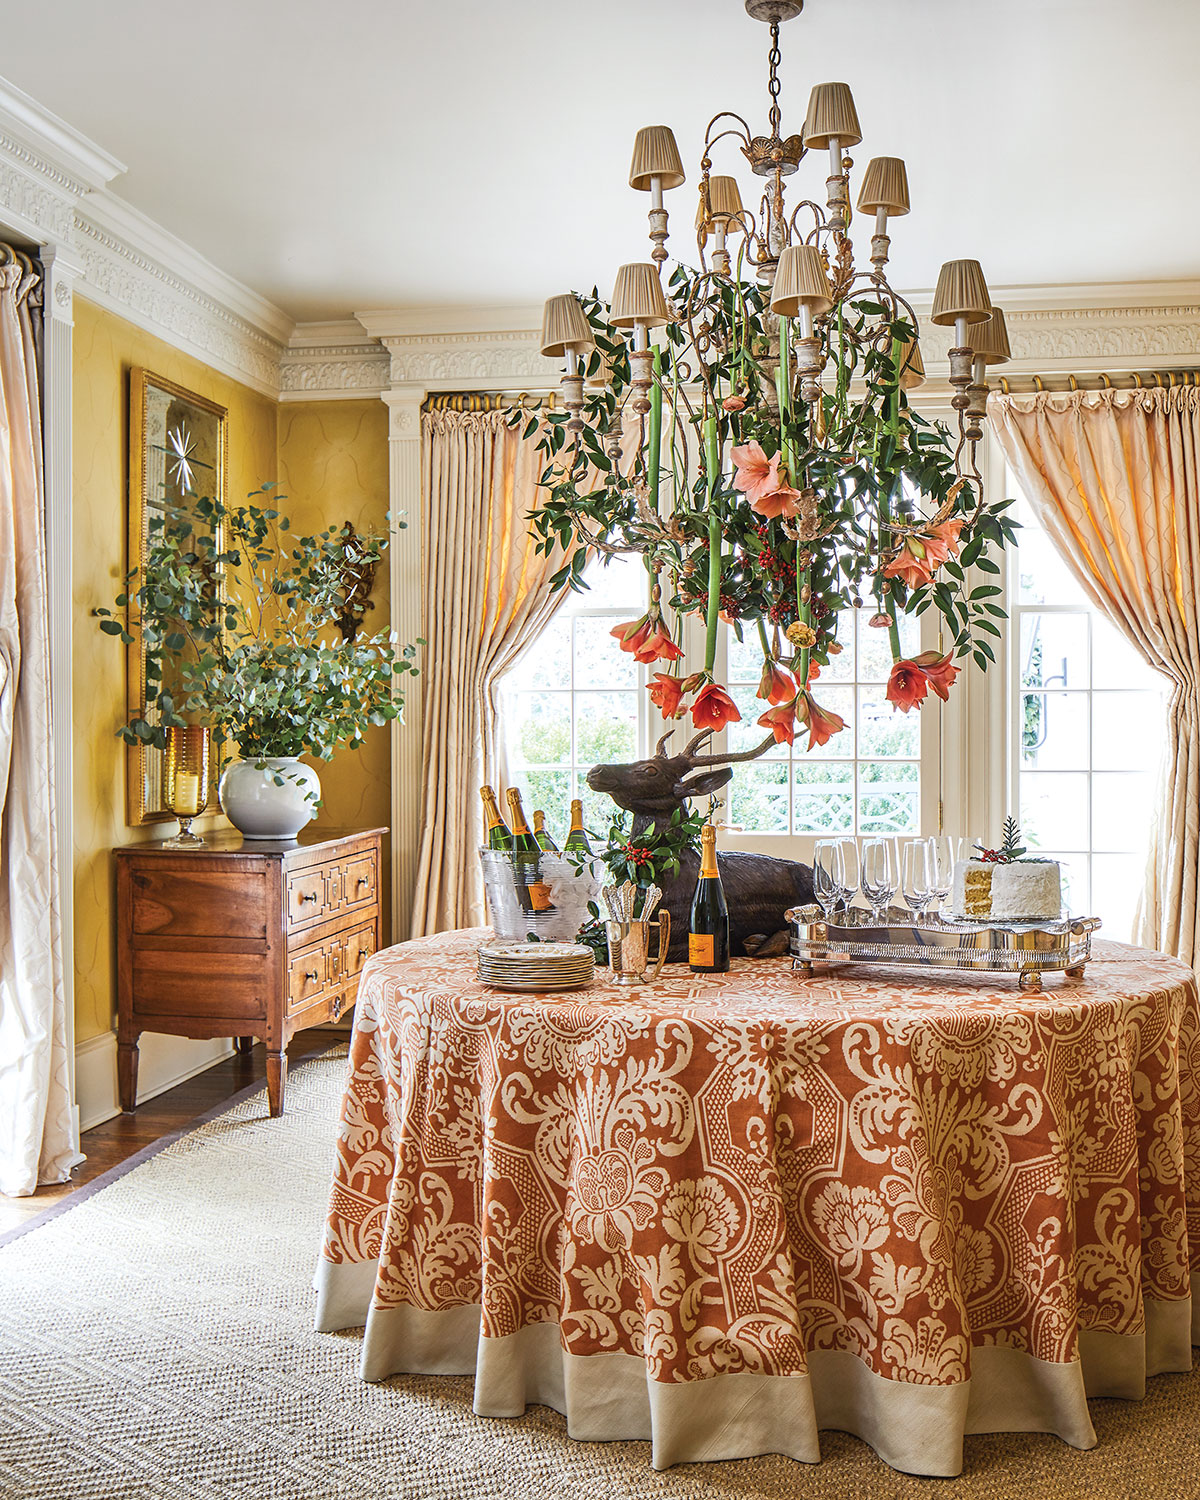 Dining room holiday decor, large arrangement of salmon amaryllis hangs from chandelier.